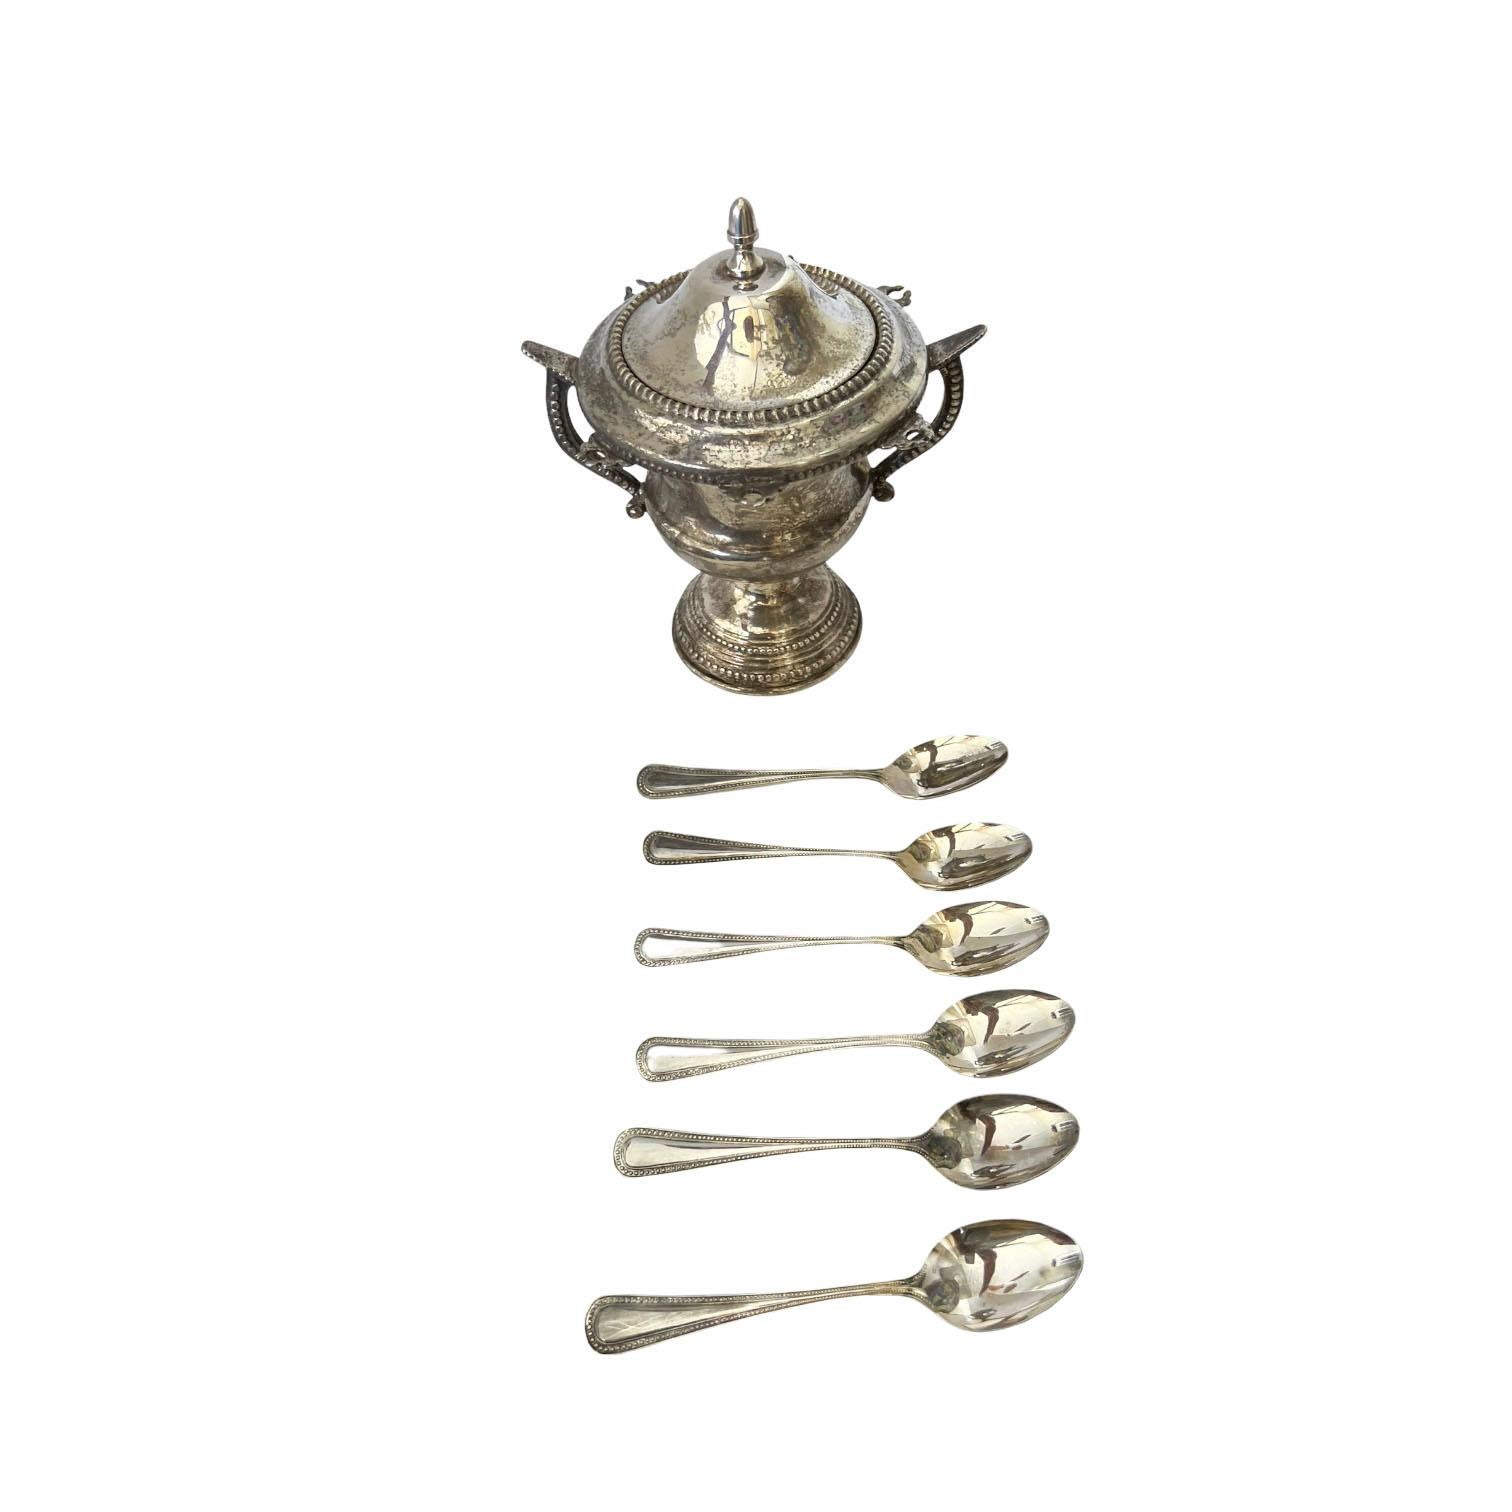 A silver plated sugar or serving bowl with six hanging spoons. An unusual piece sure to be a conversation starter.